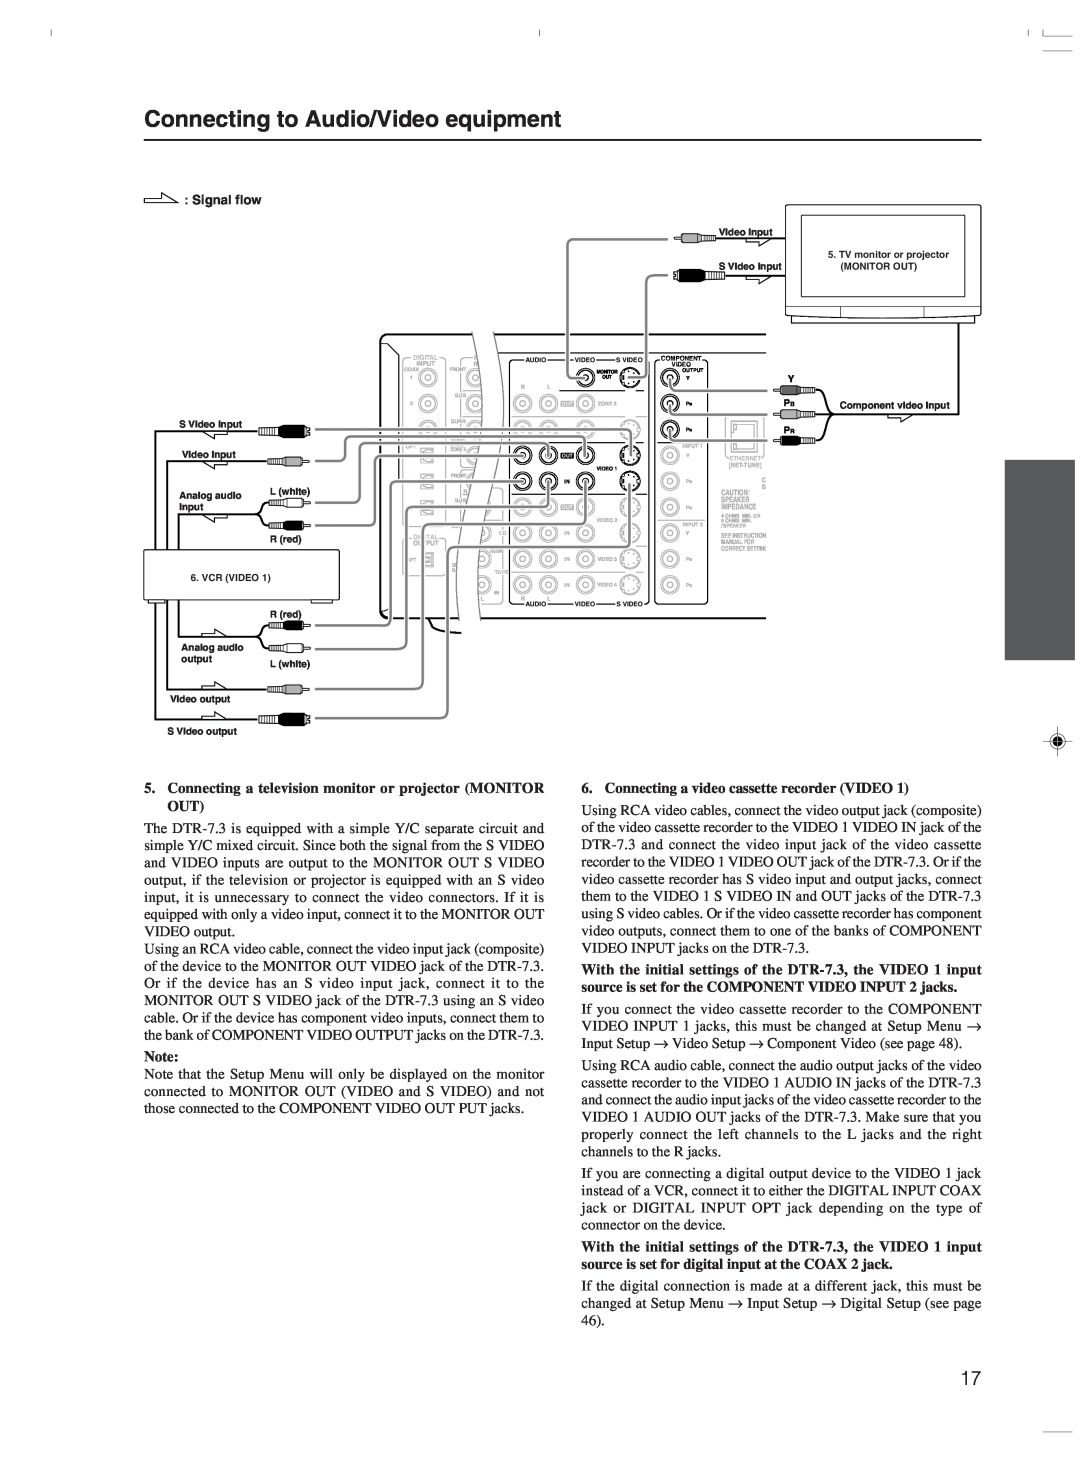 Integra DTR-7.3 instruction manual Connecting to Audio/Video equipment, Connecting a video cassette recorder VIDEO 